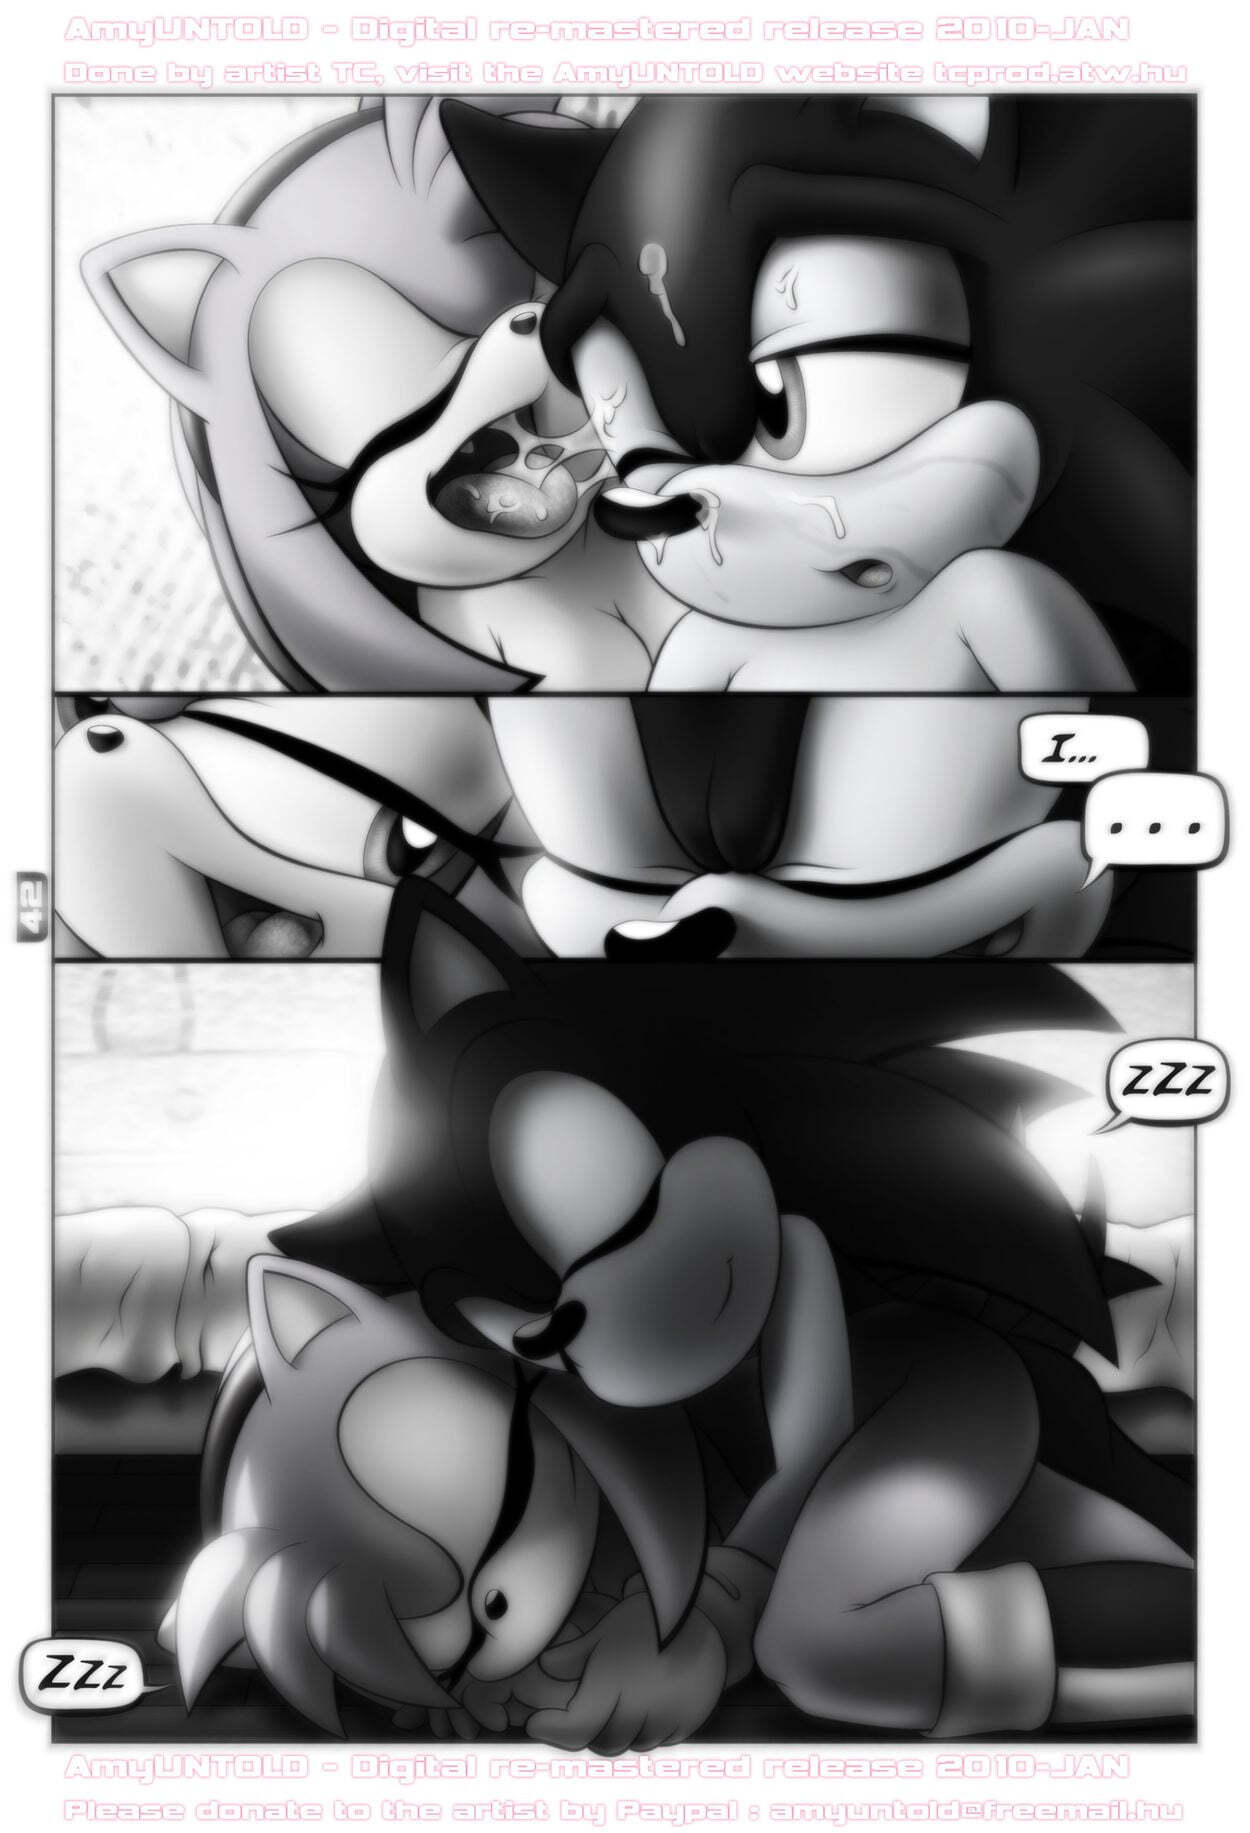 Amy Untold - Finally - Page 42